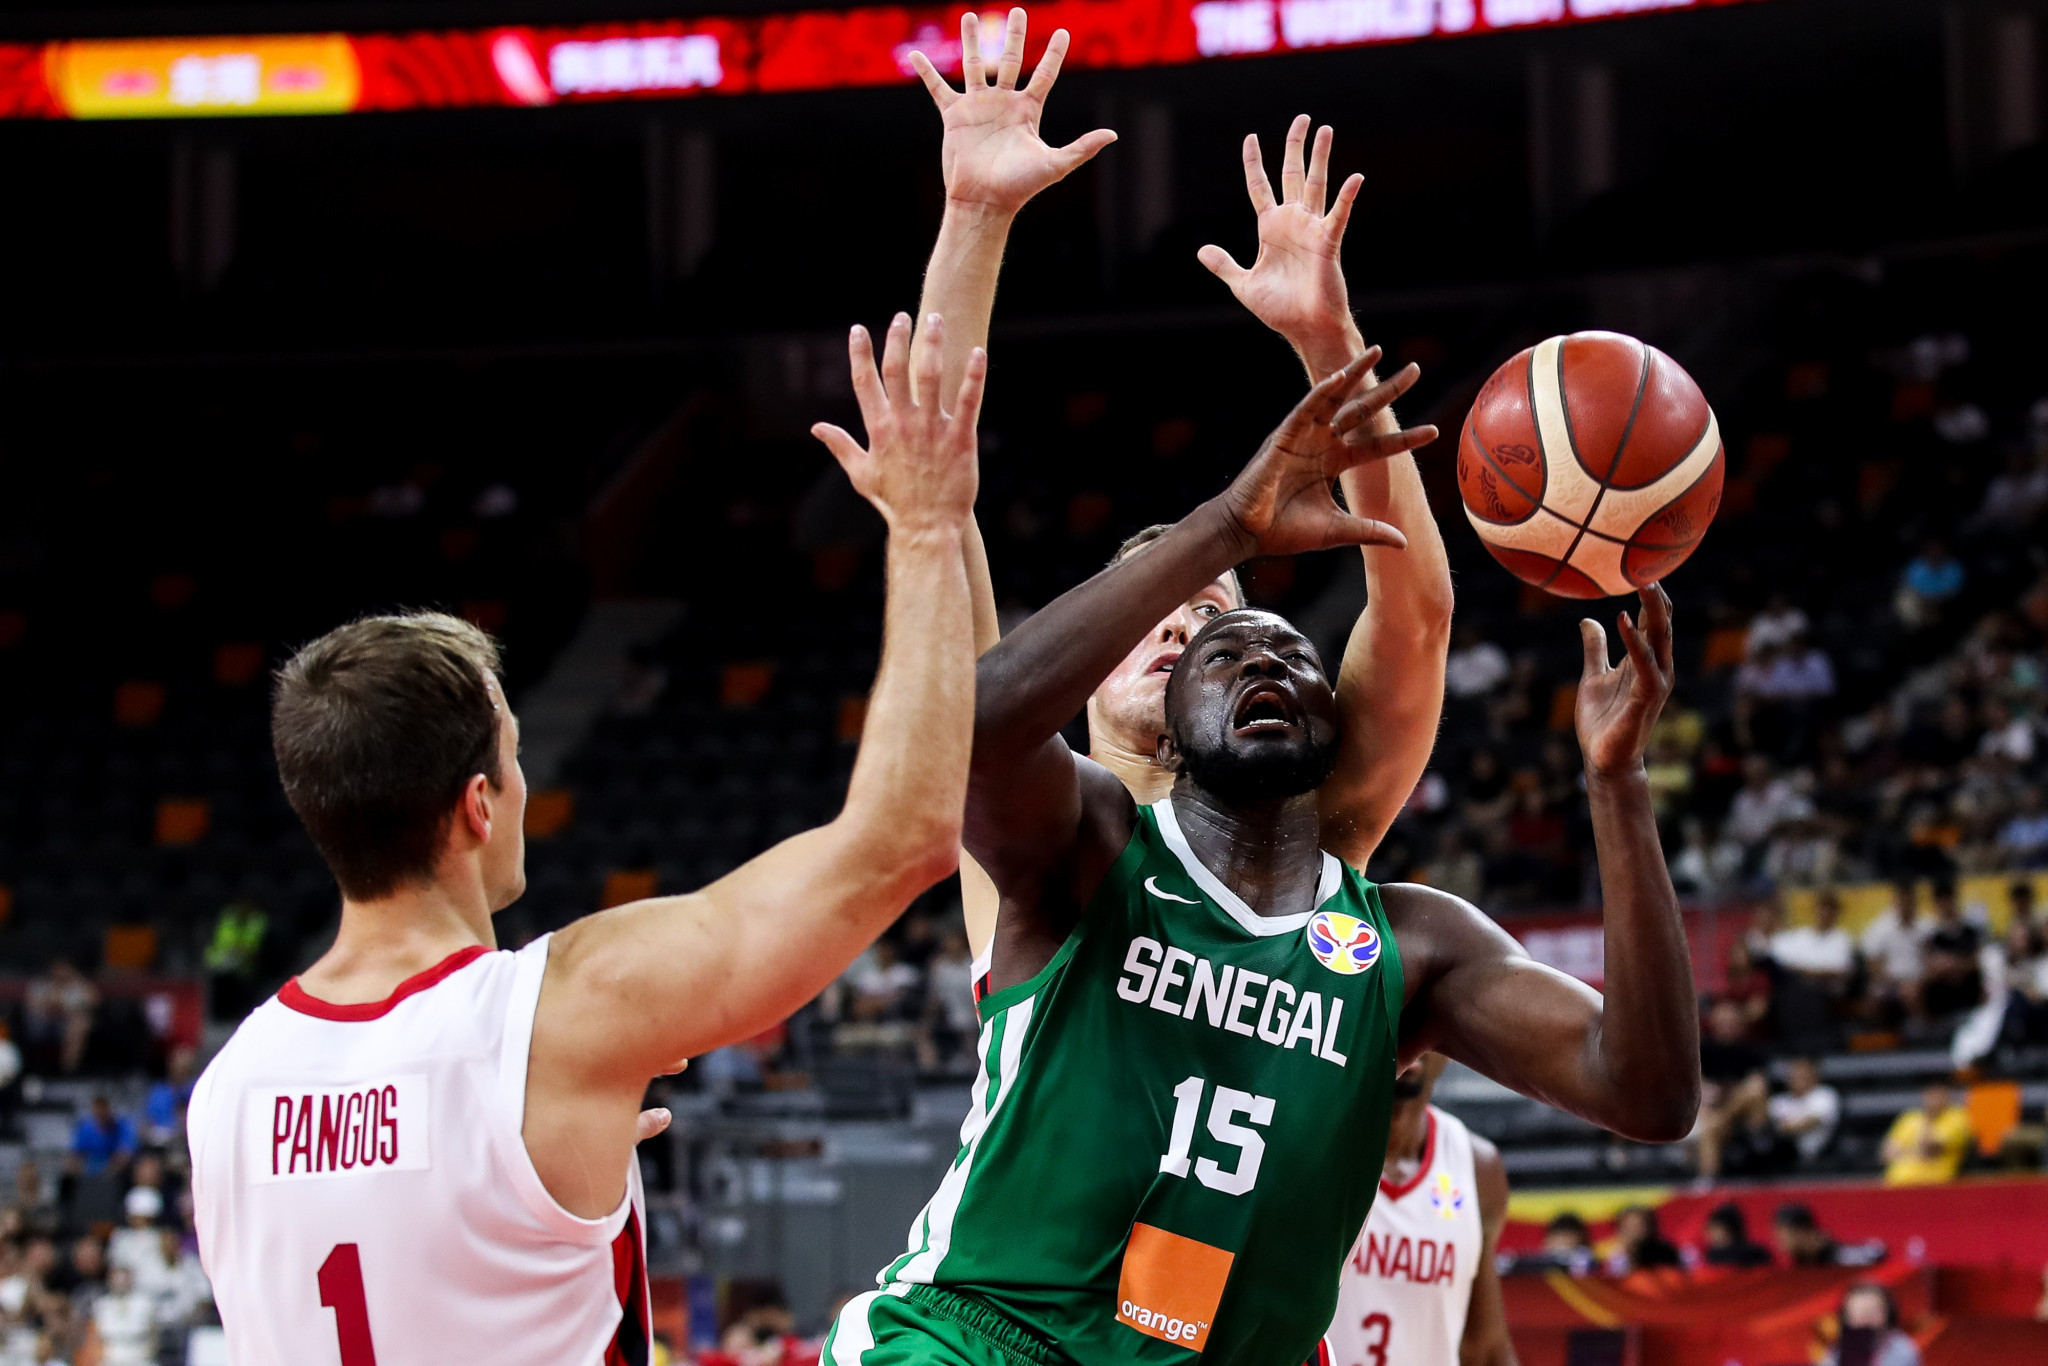 COVID-19 cases force Senegal to pull out of final Olympic basketball qualifier